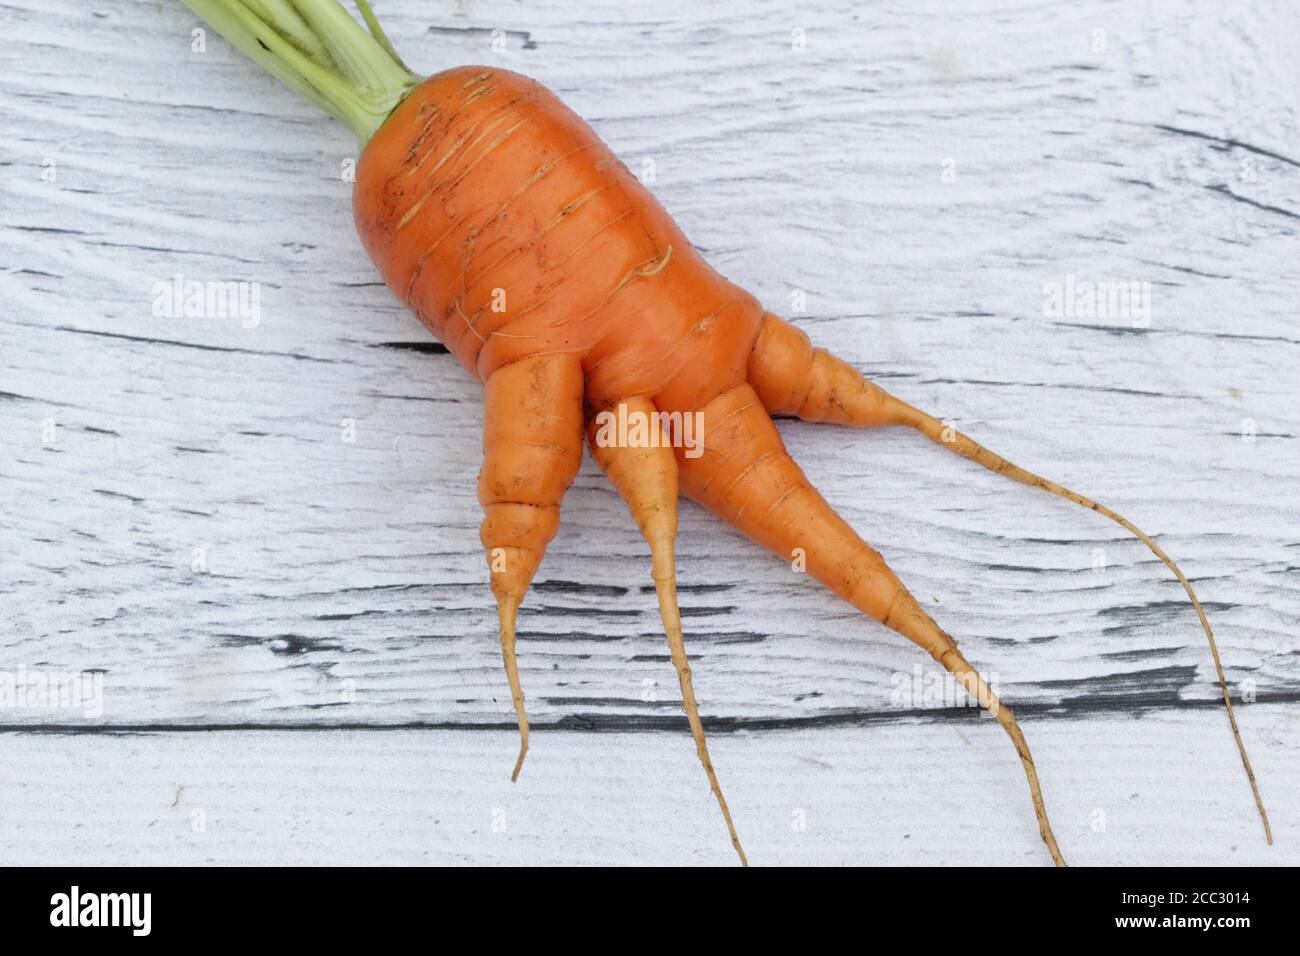 Trendy ugly organic vegetable carrot on the wooden background. Funny, unnormal vegetable or food waste concept. Stock Photo